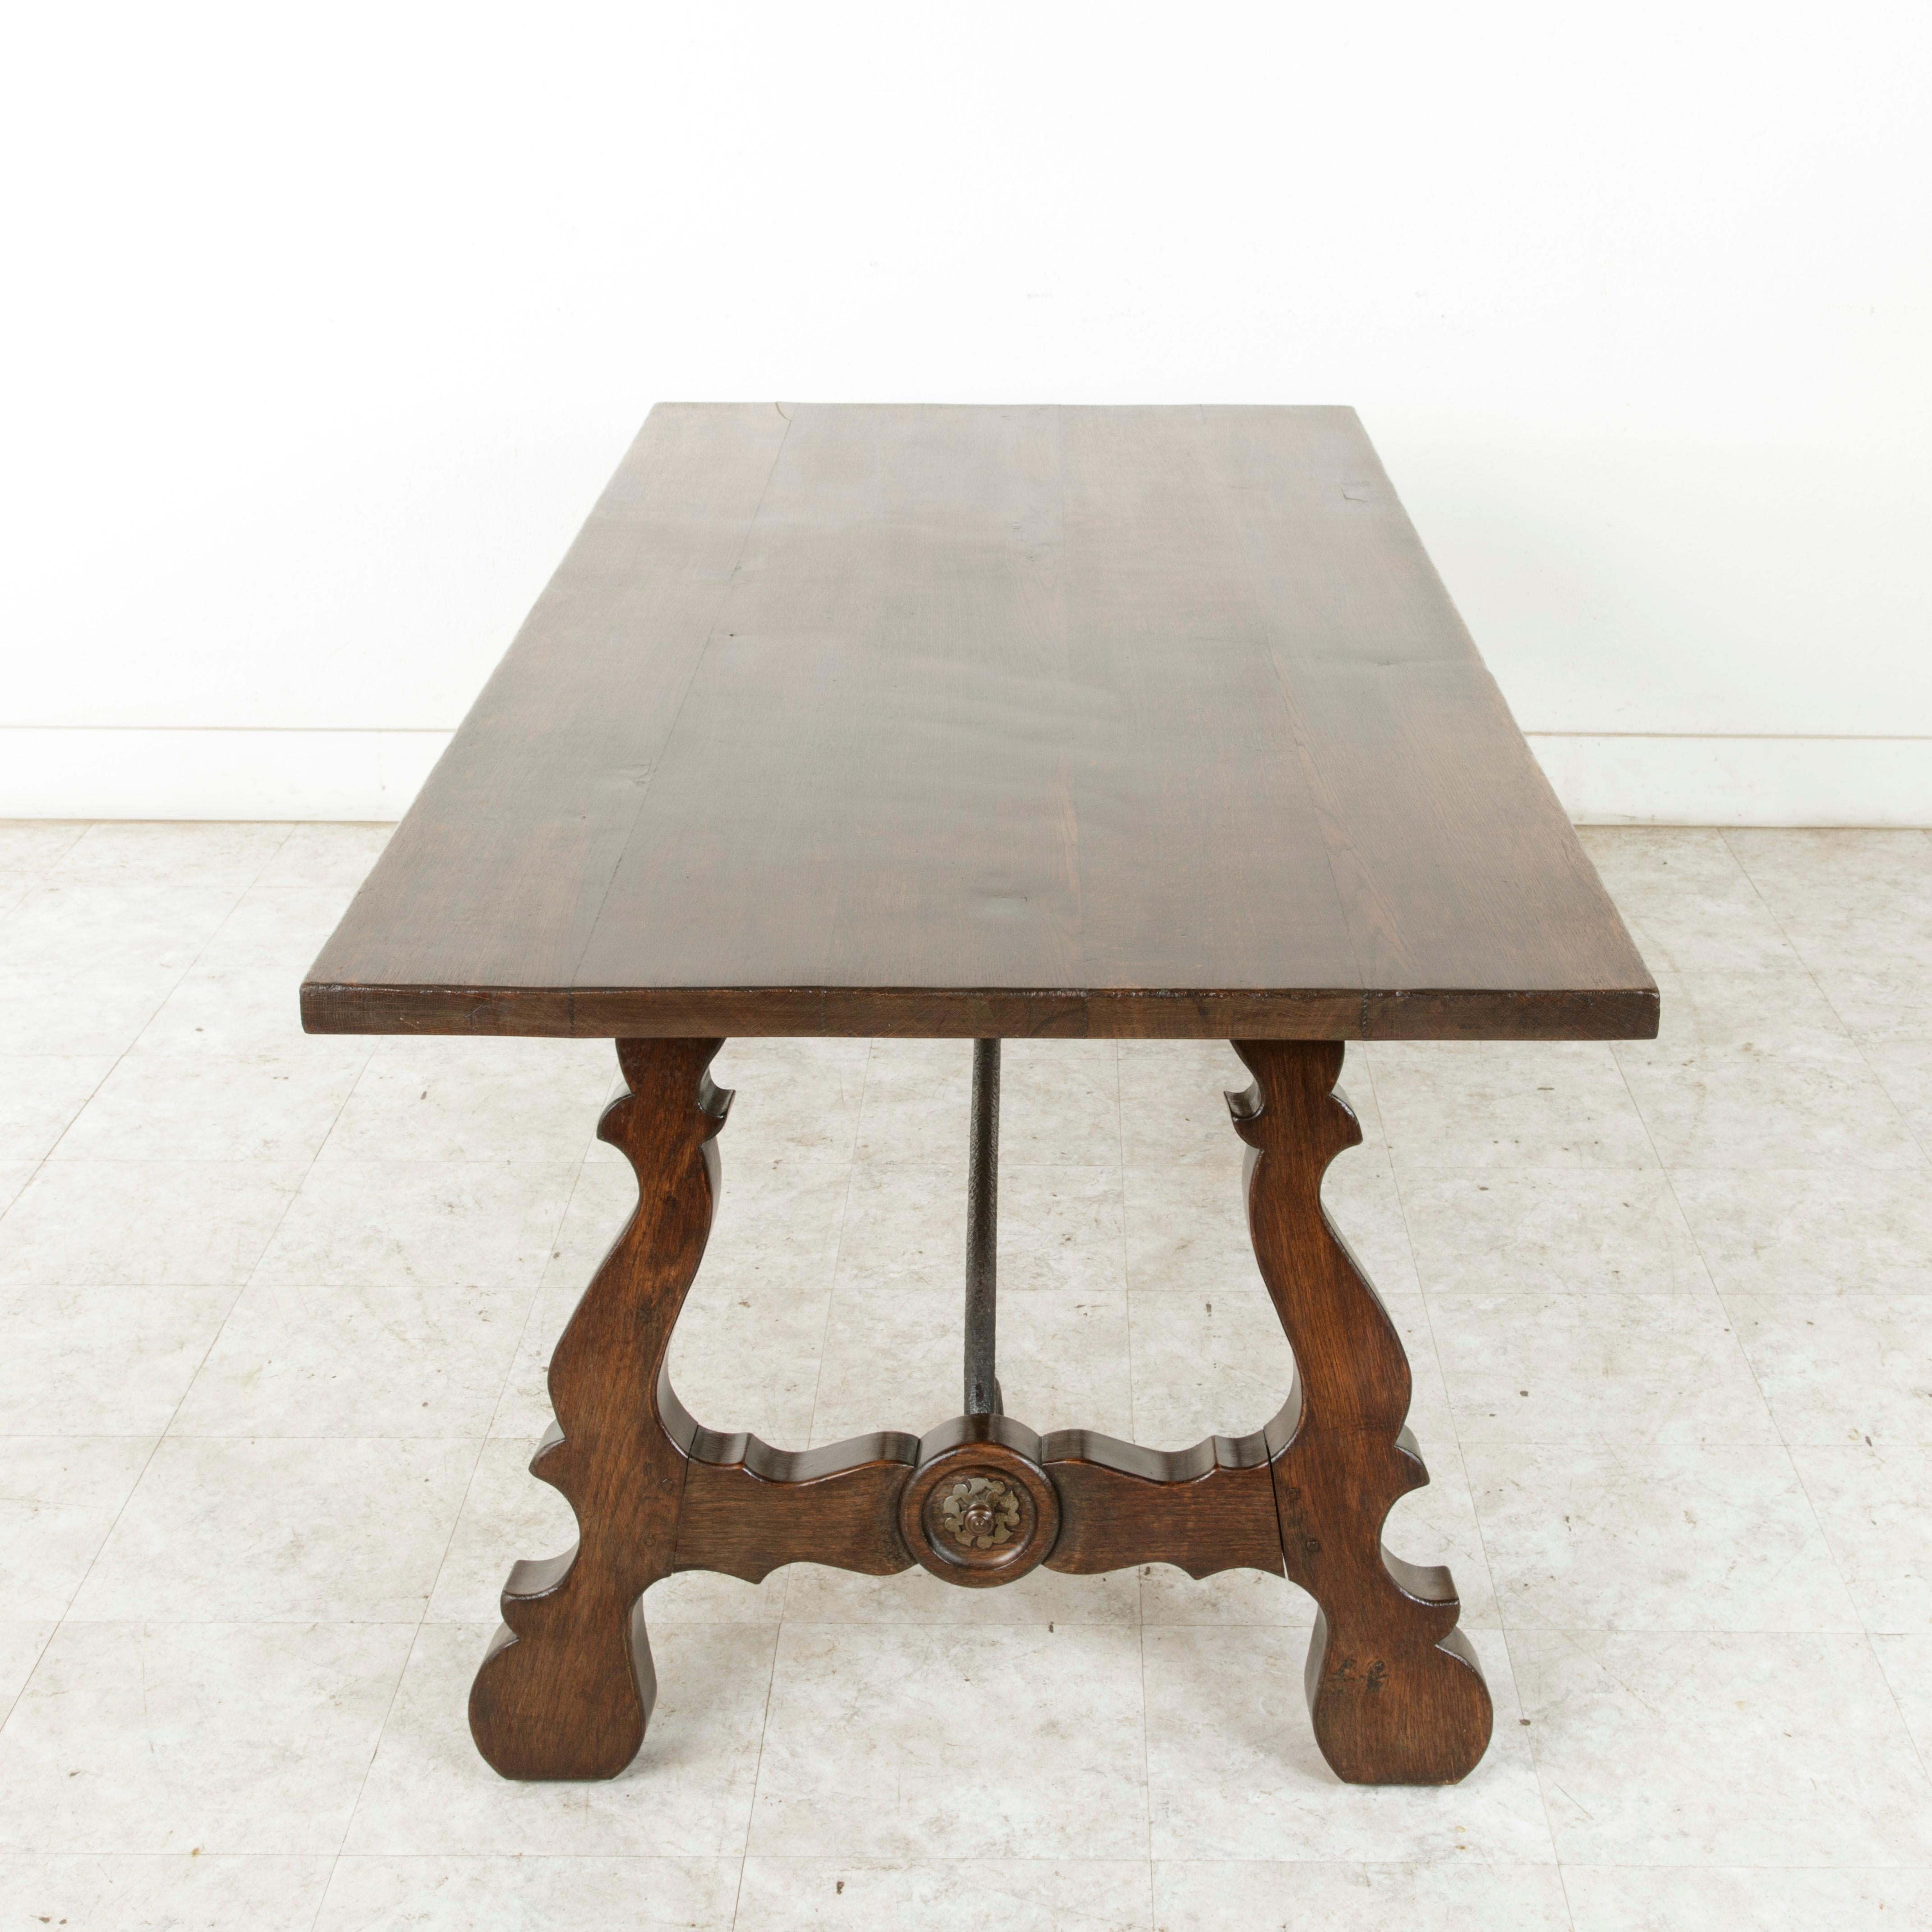 Forged Early 20th Century Oak Spanish Renaissance Style Dining Table, Iron Stretcher